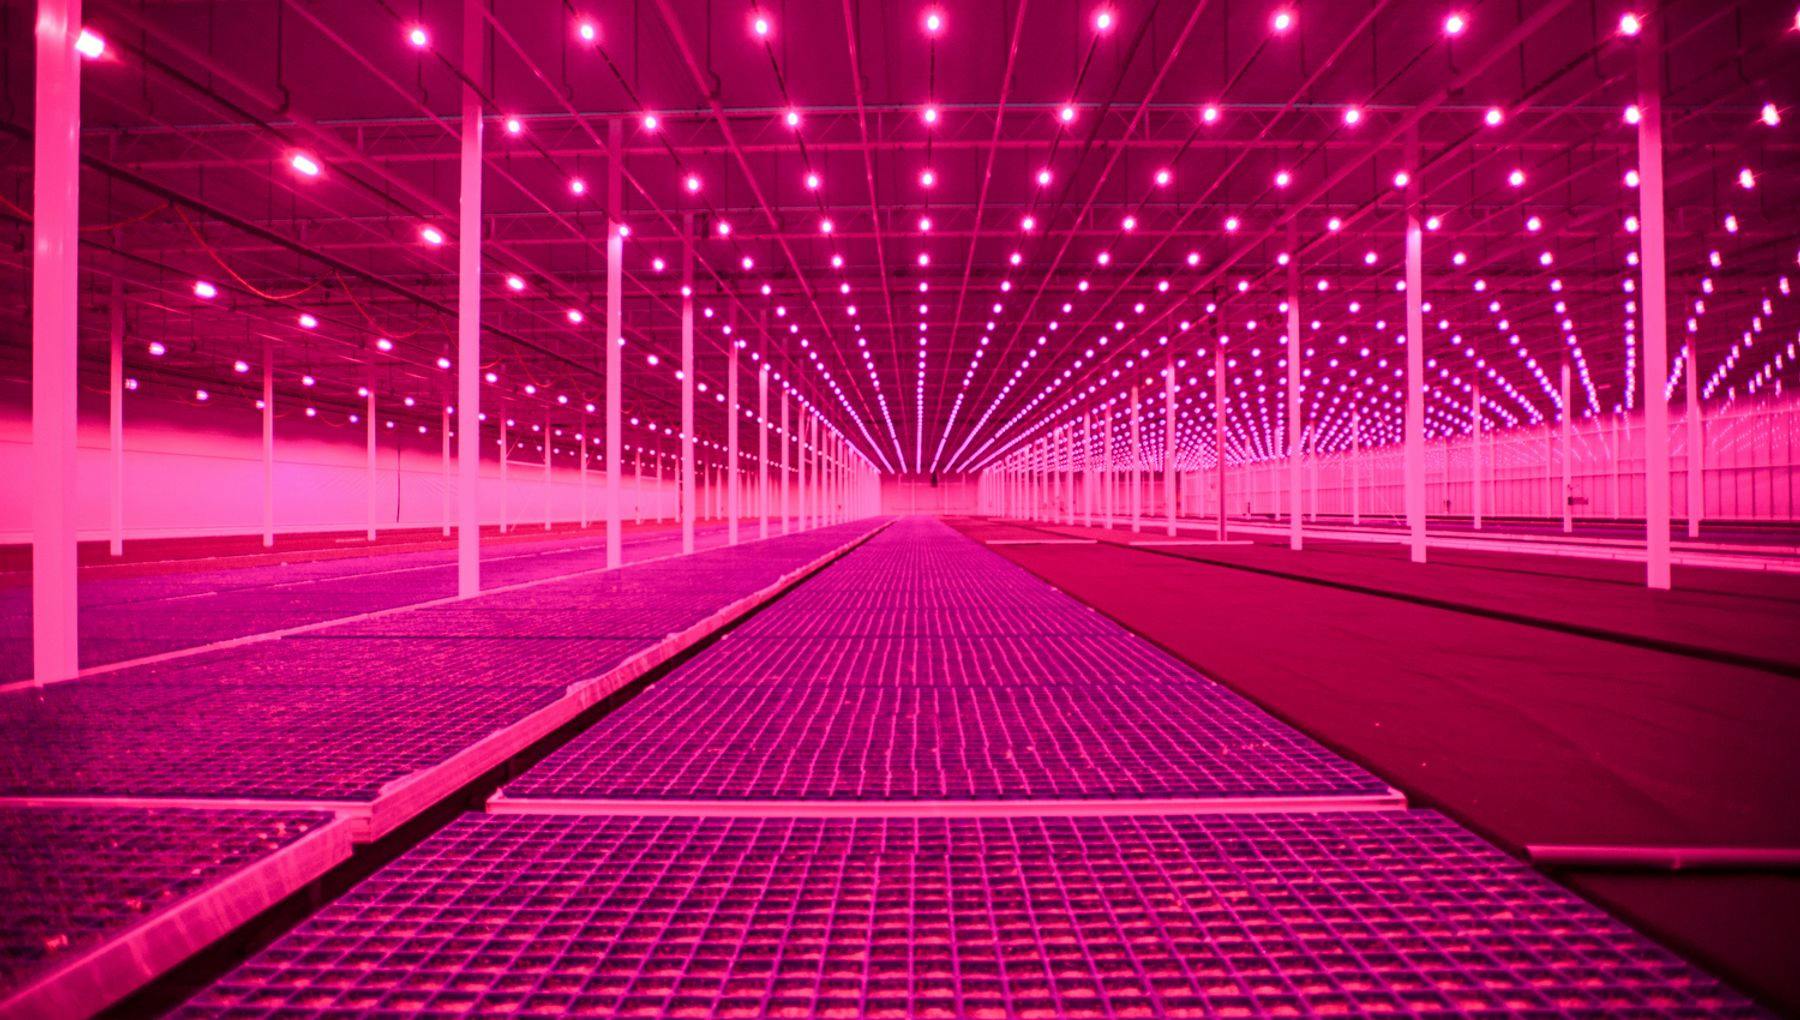 Kadir van Lohuizen / NOOR 
‘Food for thought’ 2021 - 2022

Koppert Cress is located in the Westland in the Netherlands and grows freshly-sprouted seedlings (cresses) and other edible leaves and flowers (specialties) from 100% natural aromatic plants all grown in highly innovative greenhouses. Illuminated by LED grows perfectly, the quality is better and the outburst decreases it intensifies the flavour, aroma and presentation